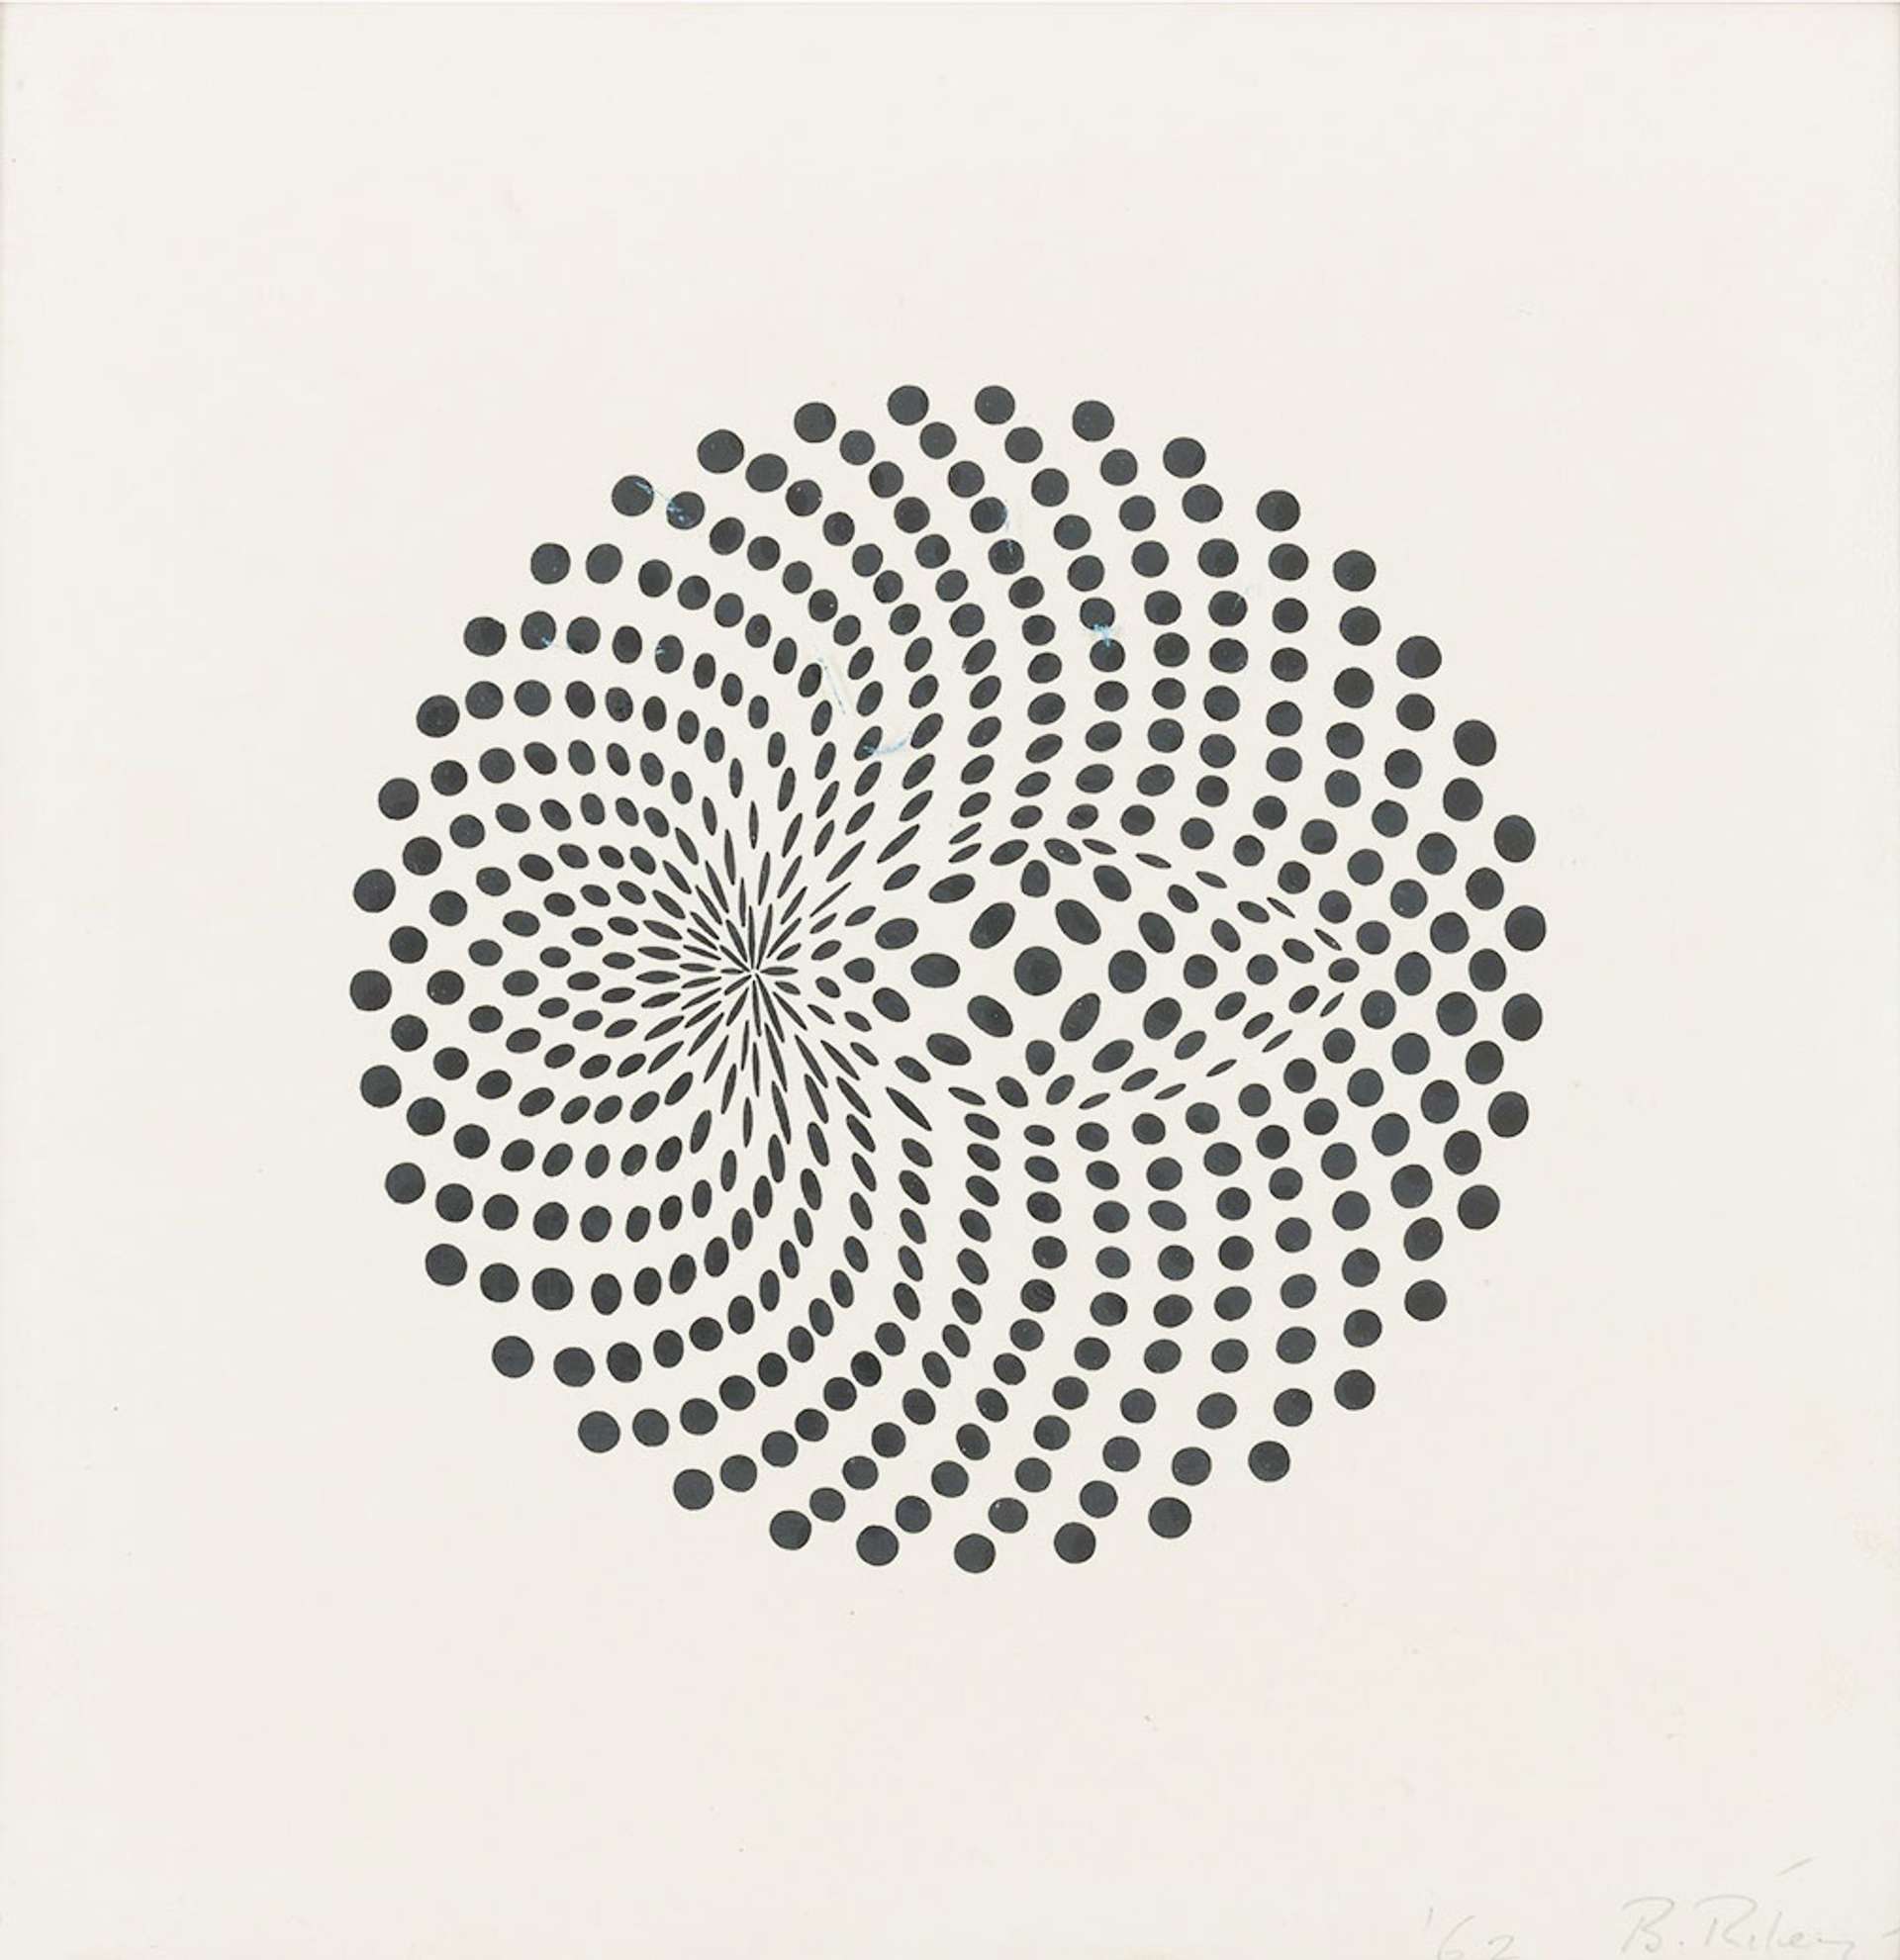 An optical illusion printed artwork. A pattern of black circles appear at the centre of the composition, contained within one circular shape, meeting at the middle in different shapes and sizes to give the appearance of movement.